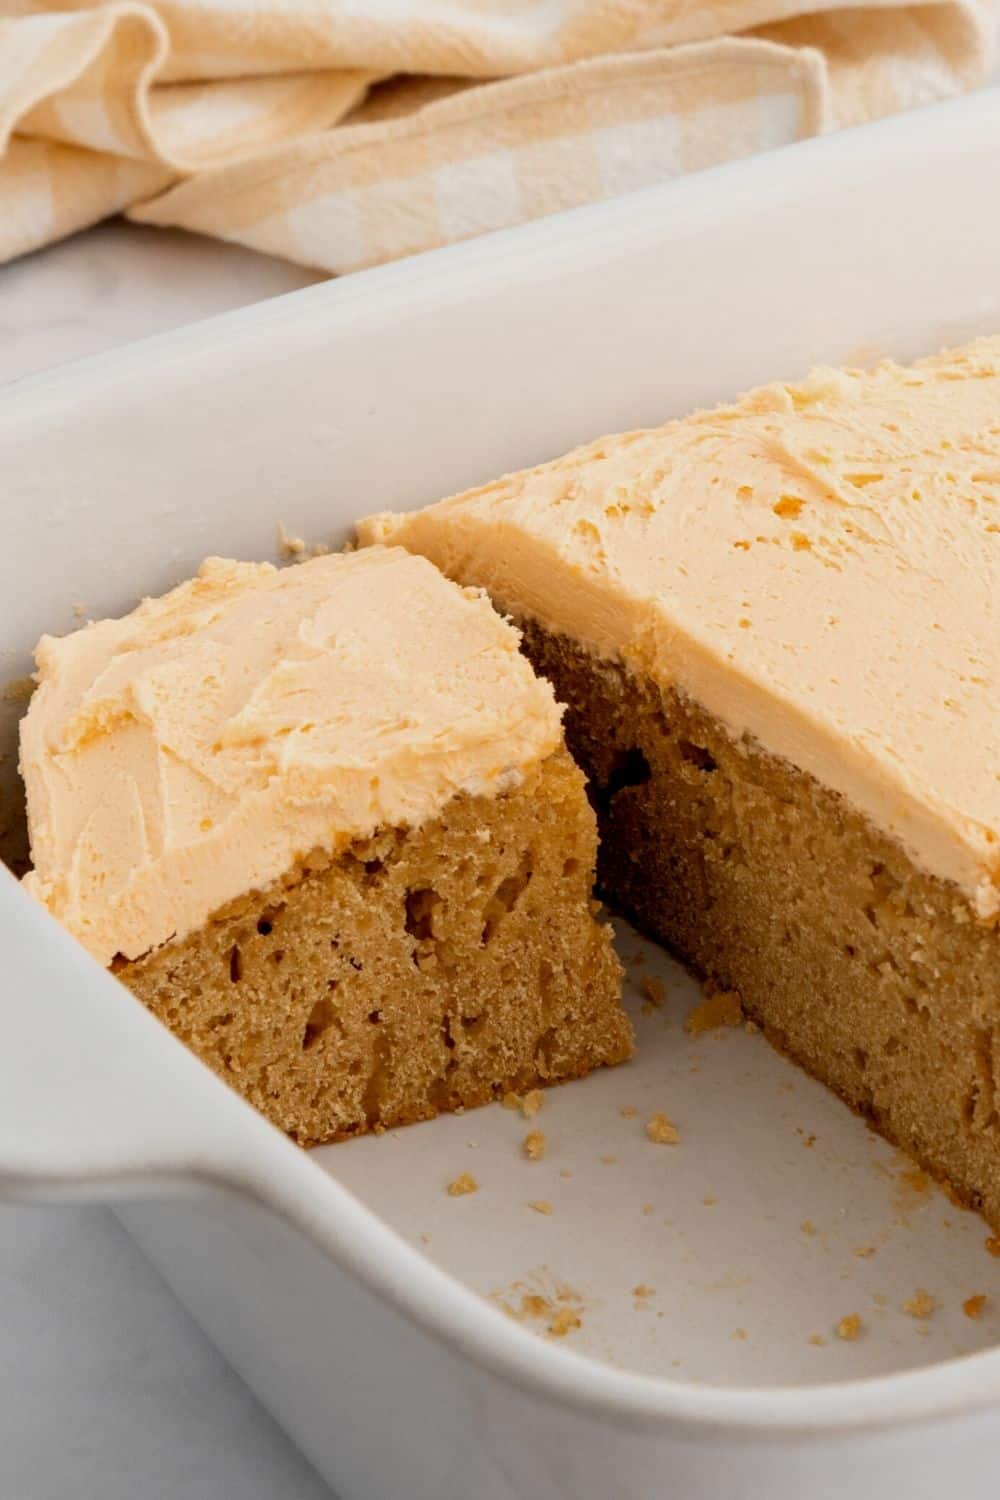 close-up view of a slice of homemade butterscotch cake, topped with butterscotch frosting, cut from the pan.